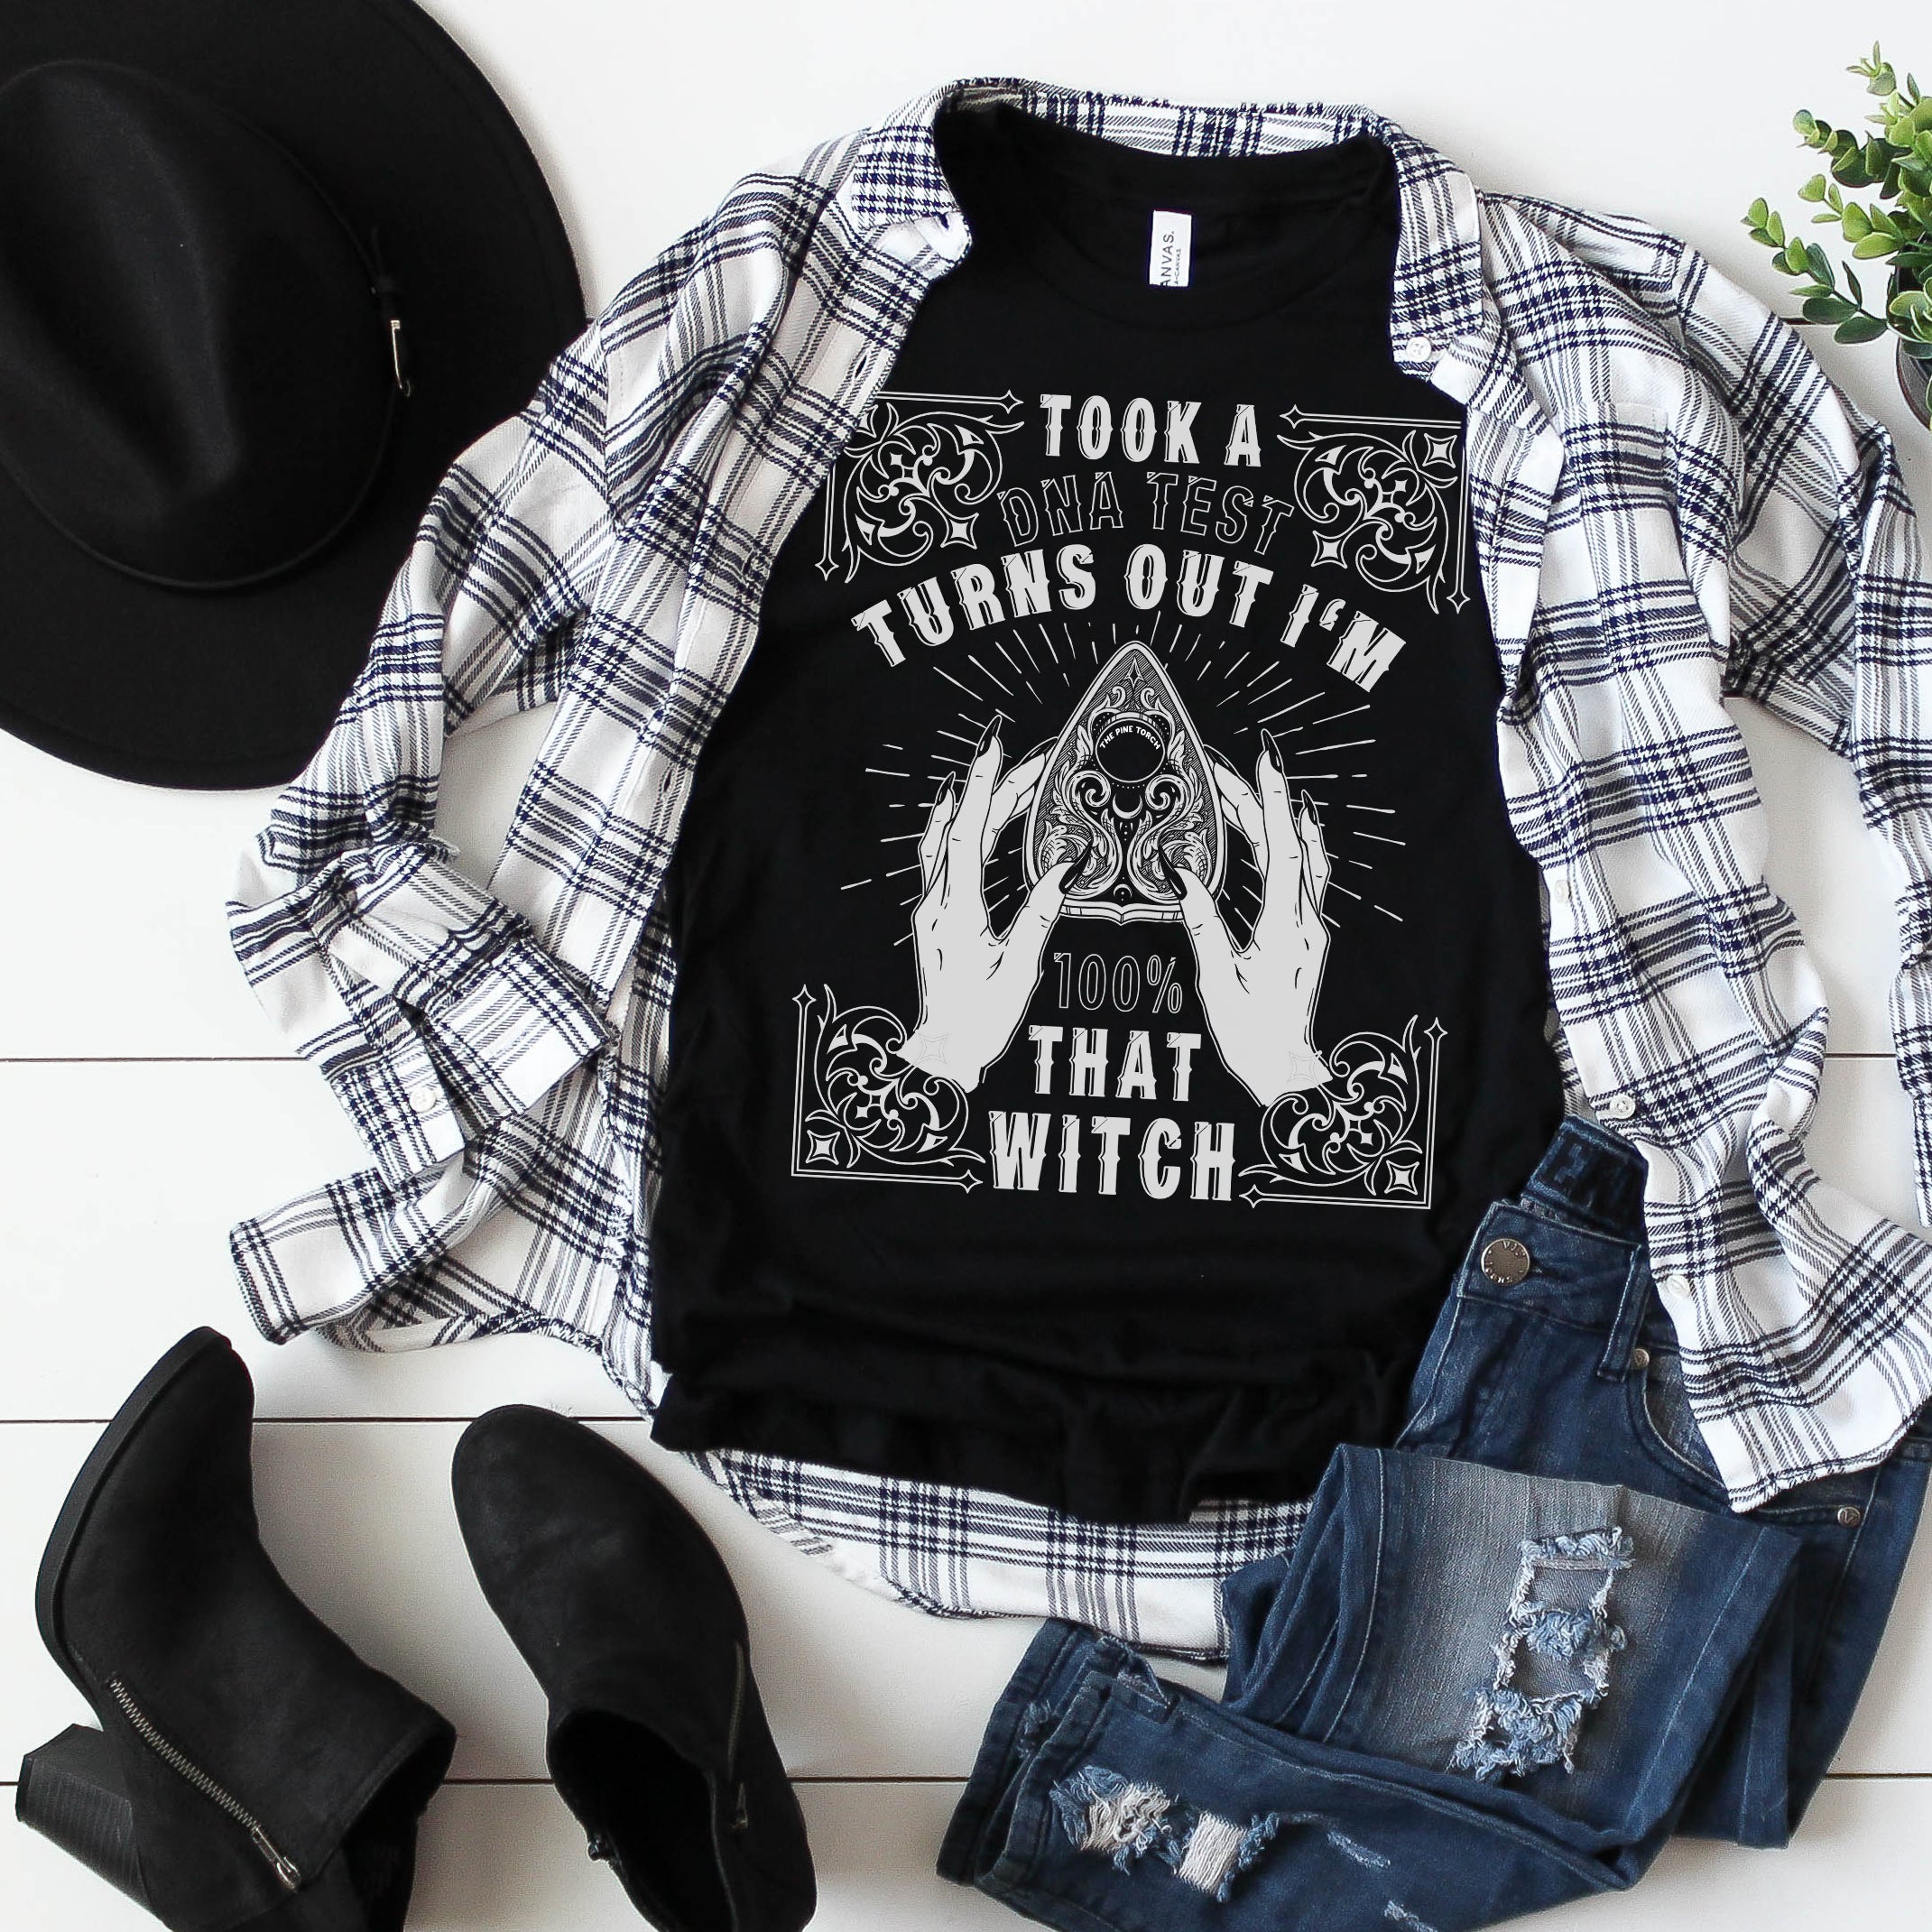 « THAT WITCH » SLOUCHY TEE